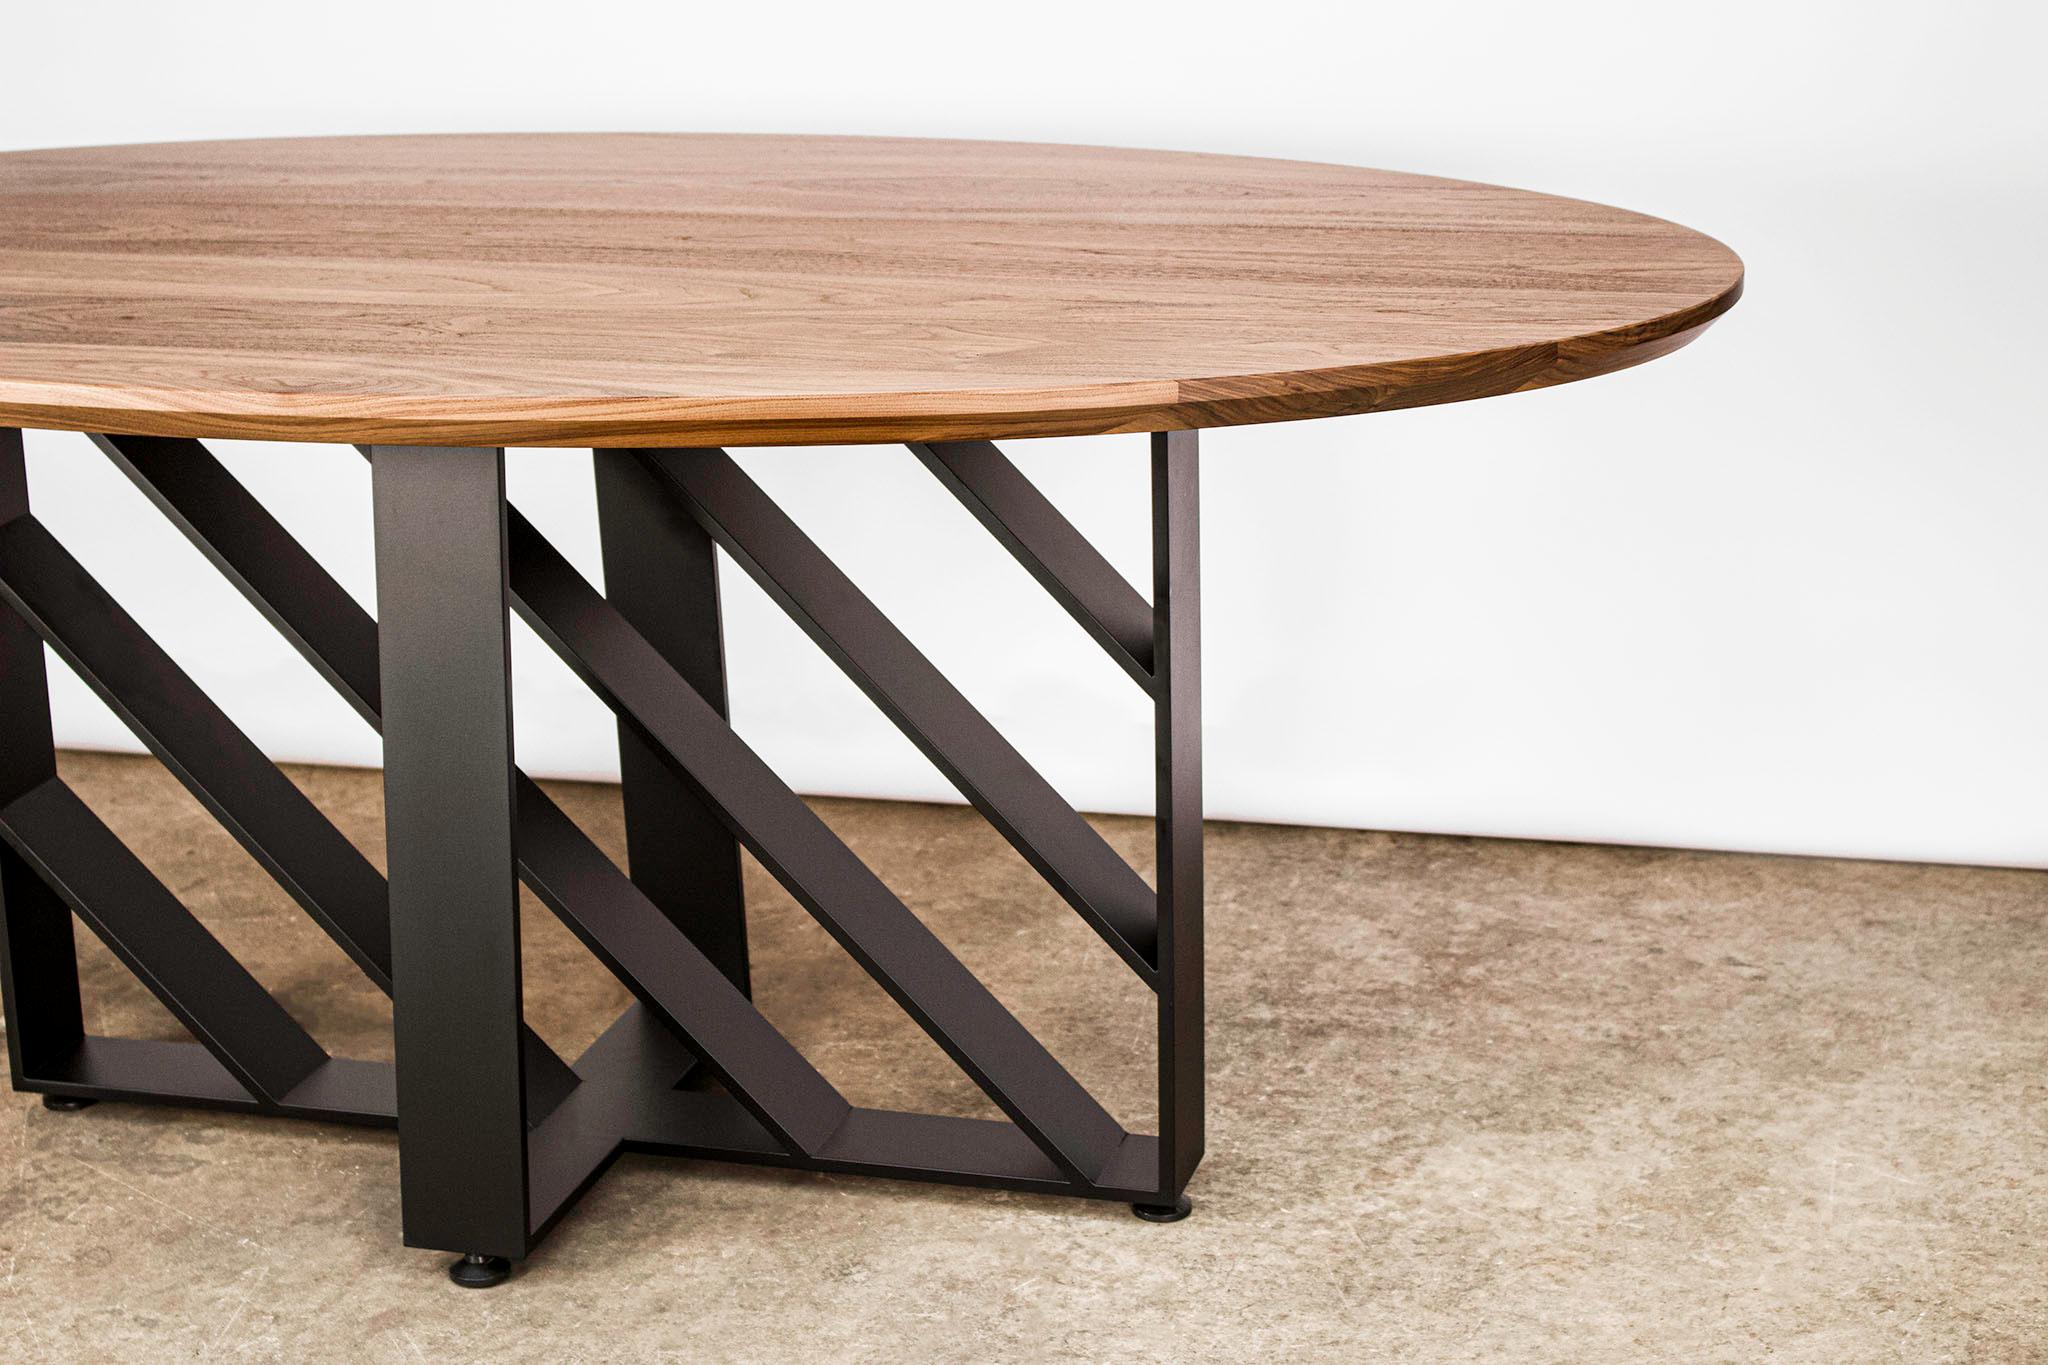 Oval Dining Table, Blackened Steel, Hardwood, Modern, Custom, Semigood In New Condition For Sale In Issaquah, WA